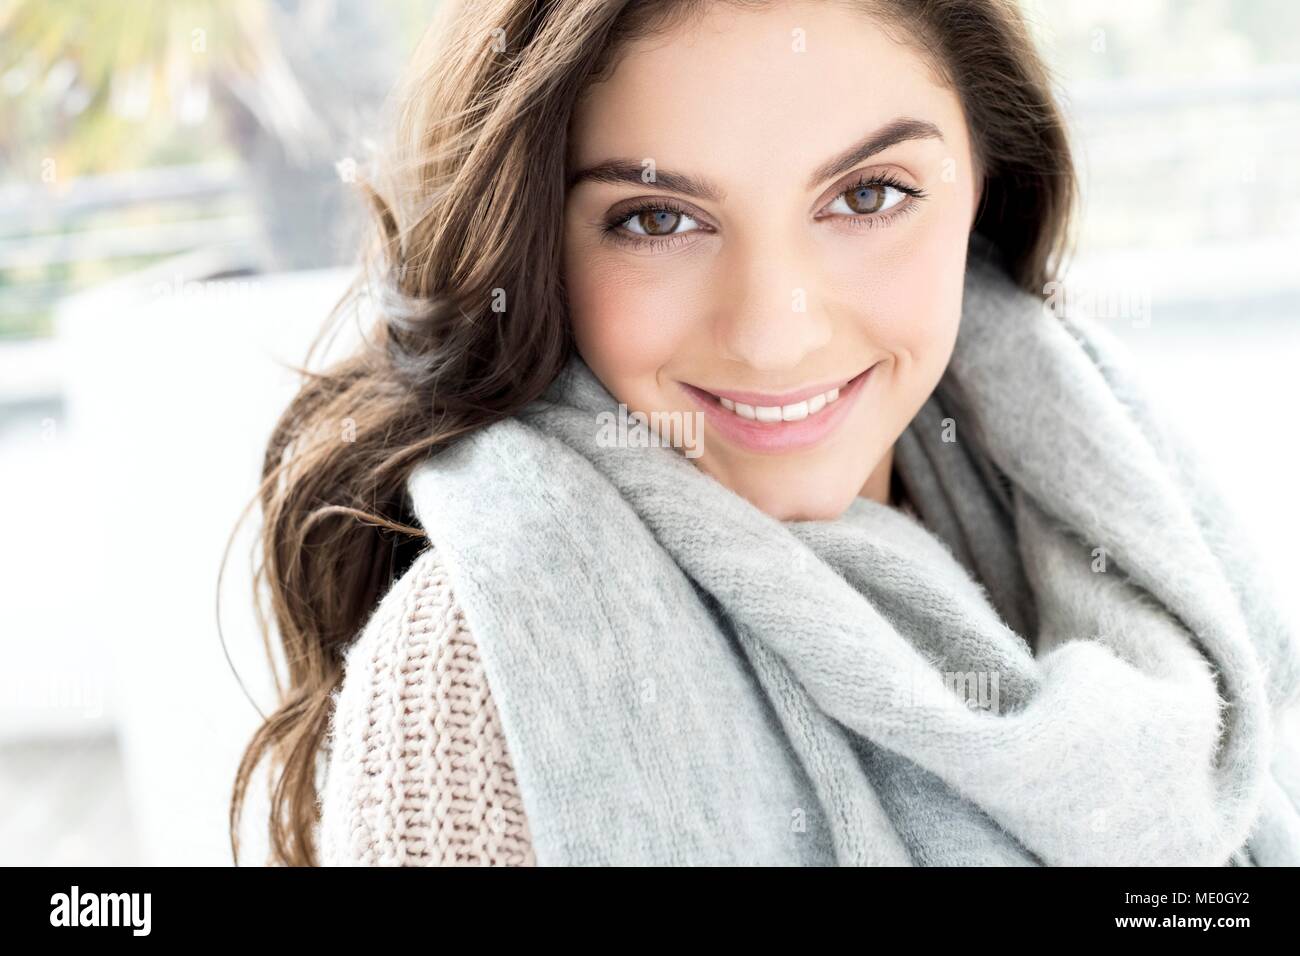 Young woman wearing grey scarf. Stock Photo